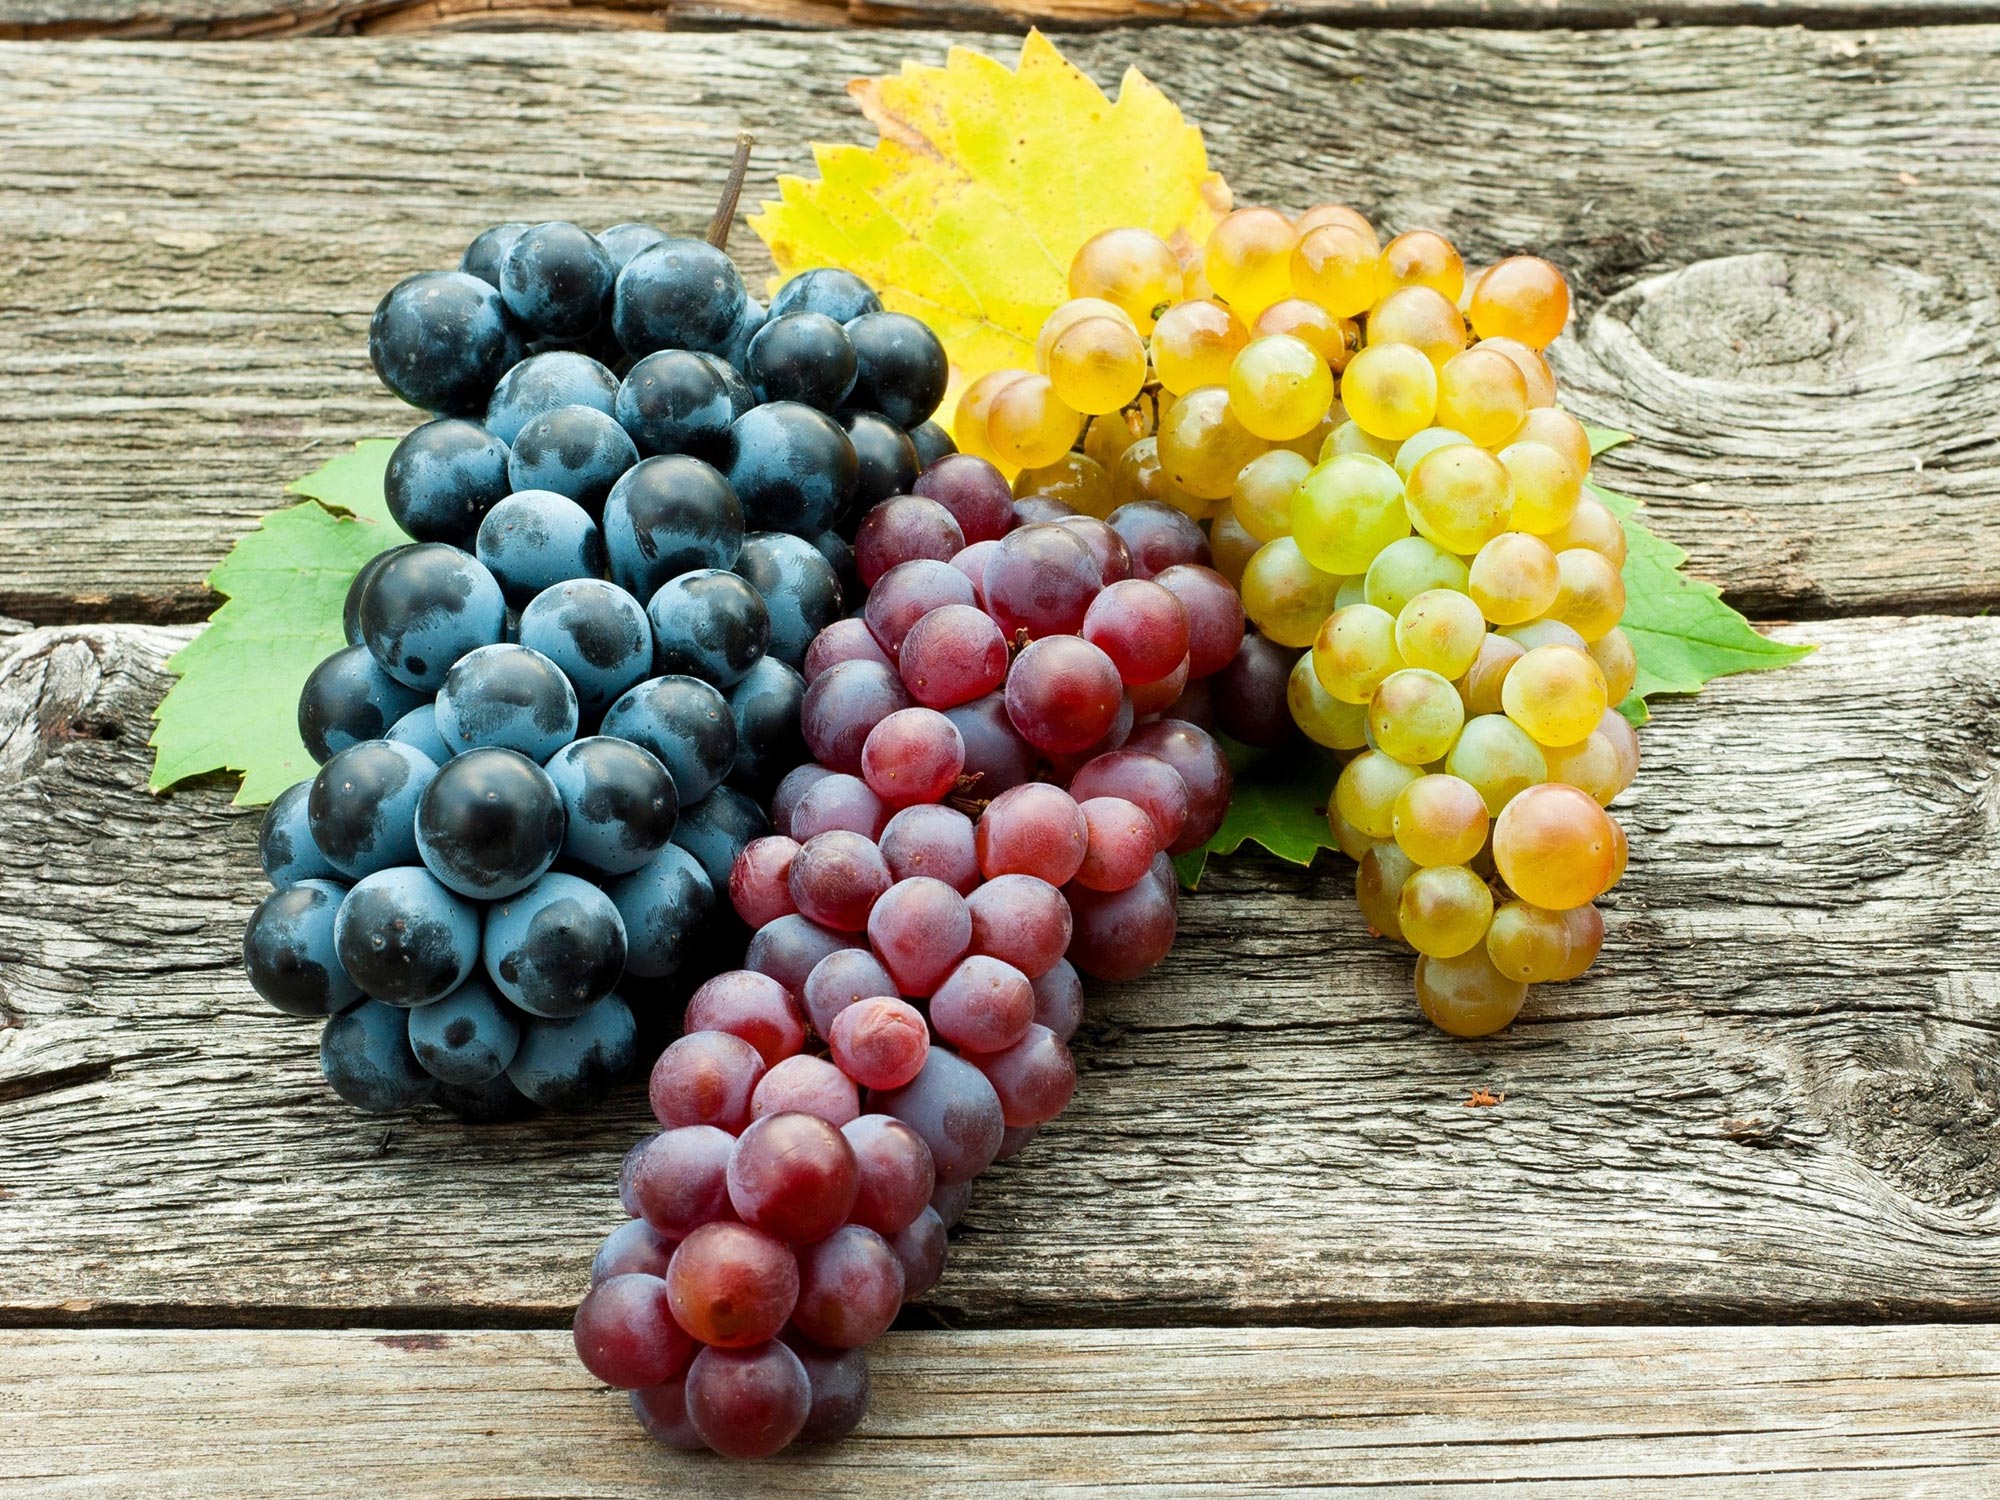 Astonishing” Effects of Grape Consumption and “Remarkable” Impacts on  Health and Lifespans